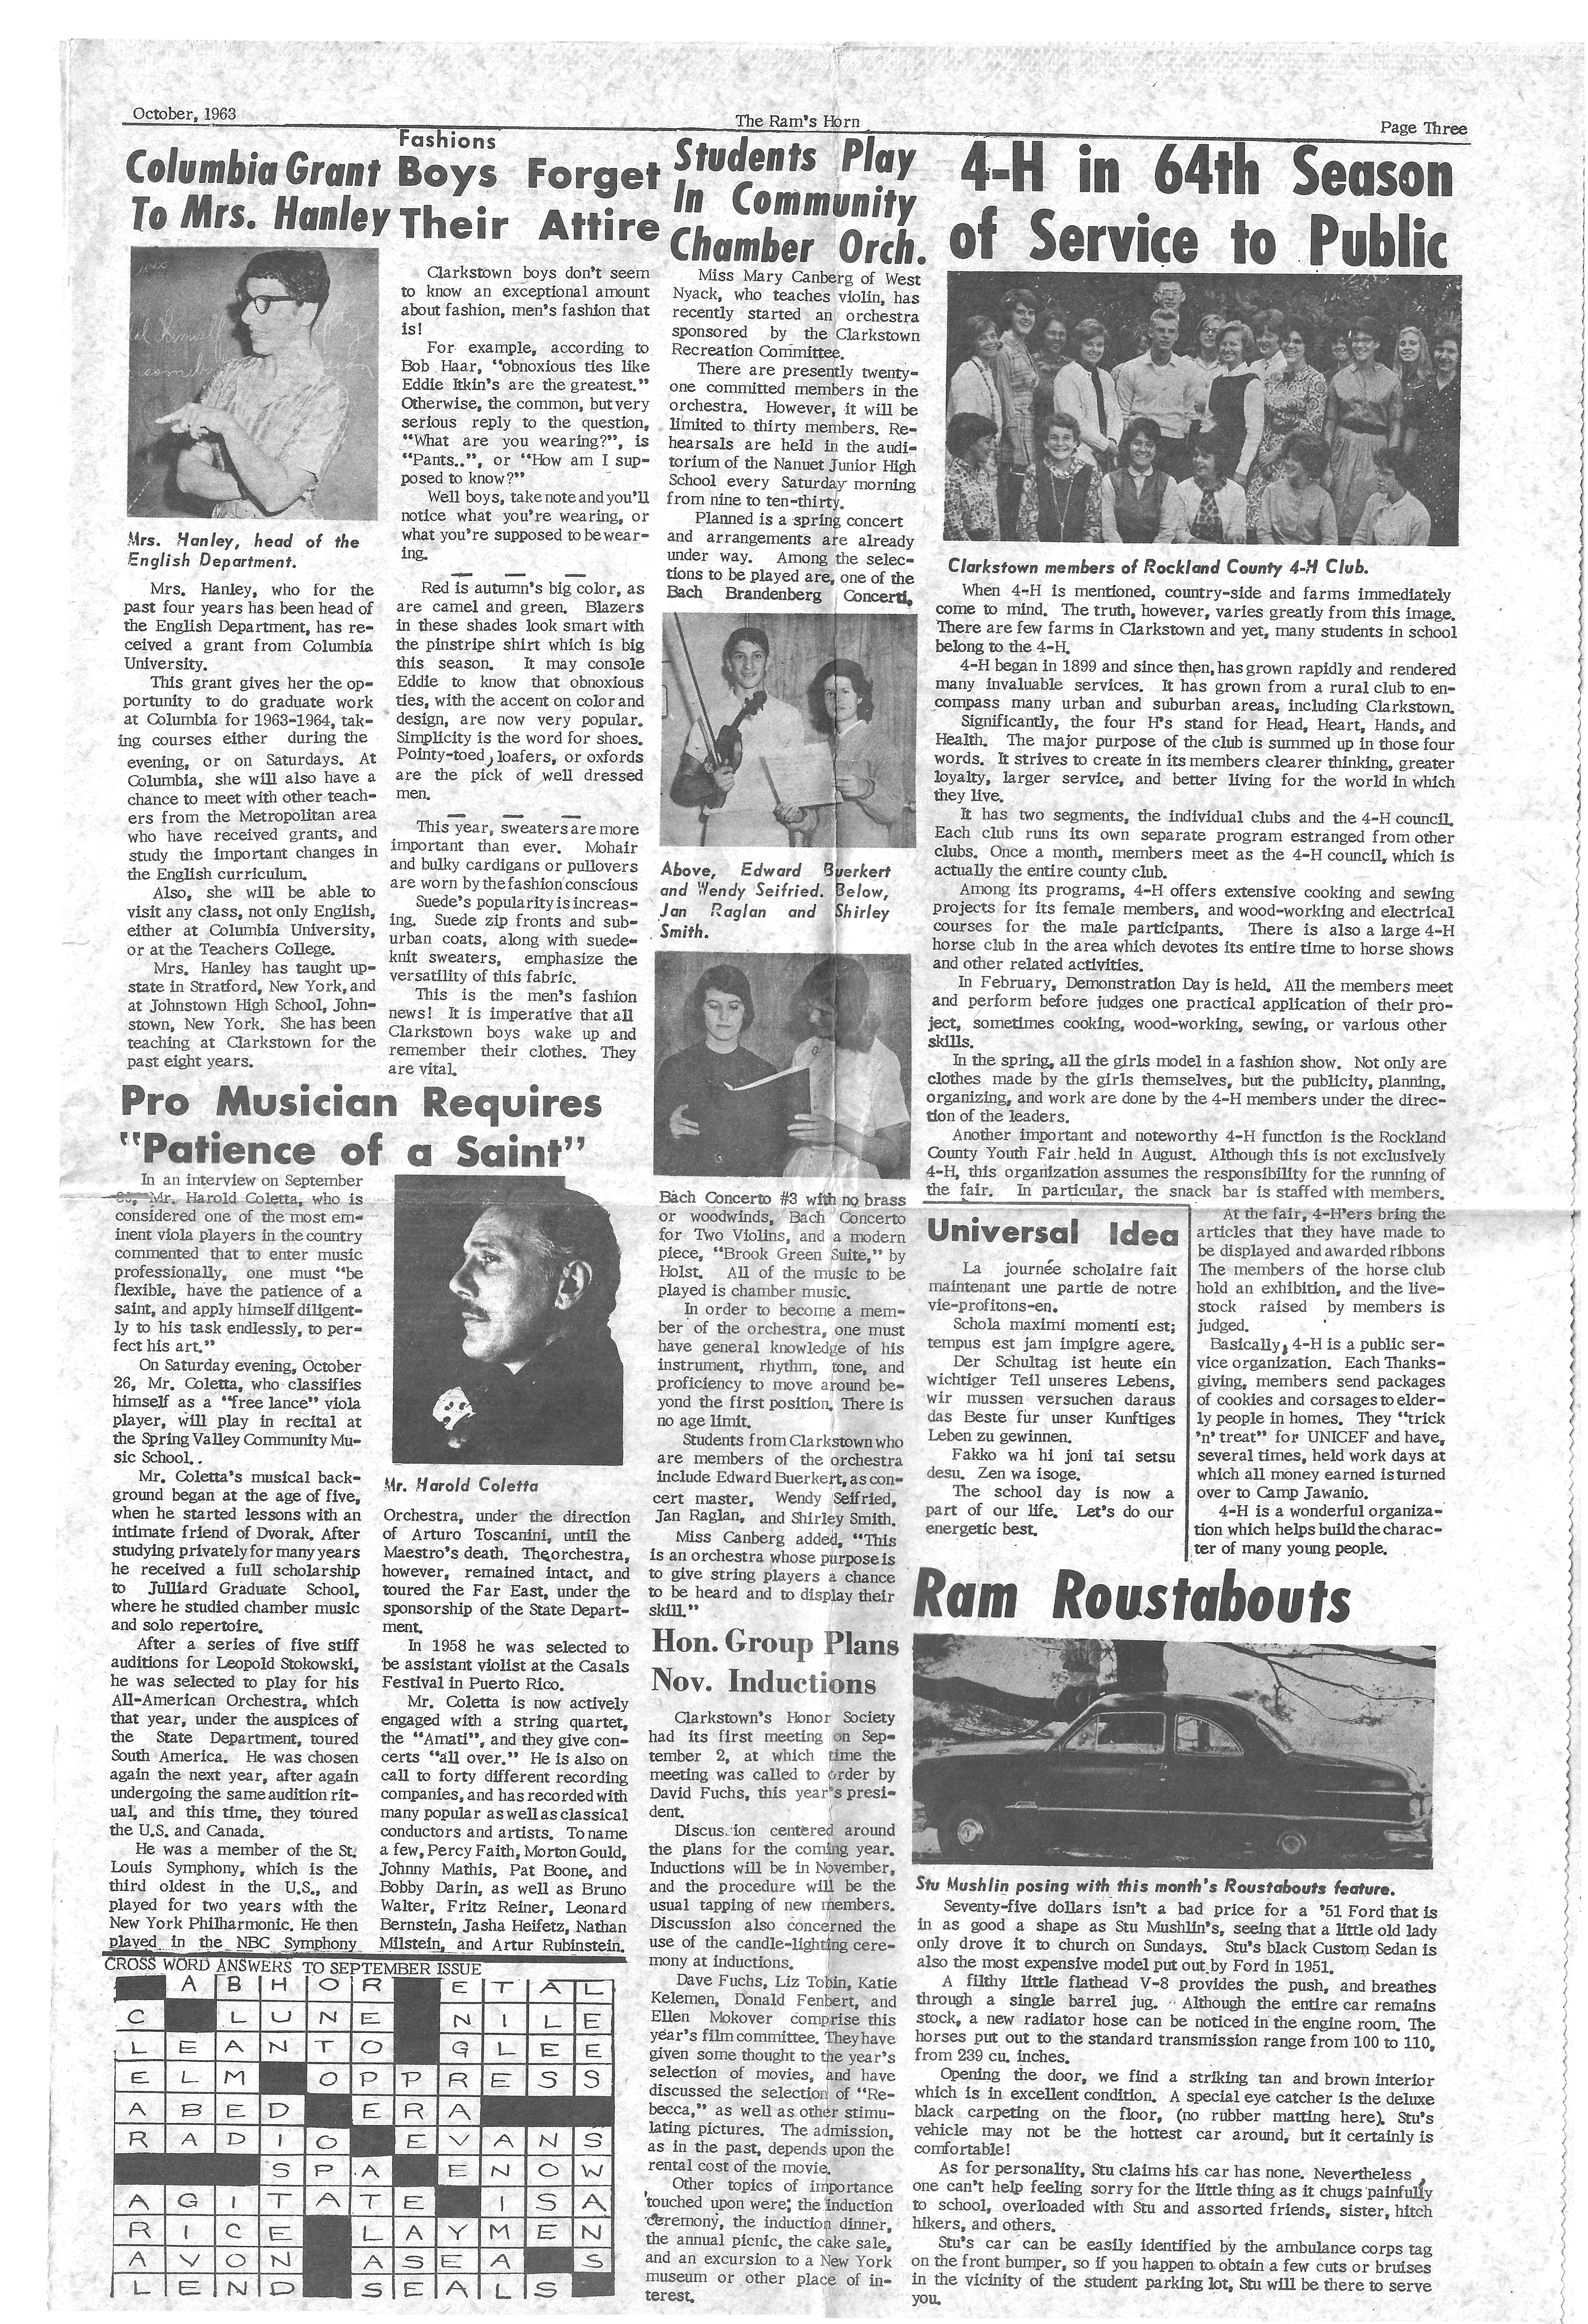 The Ram's Horn - October 1963 - Page 3